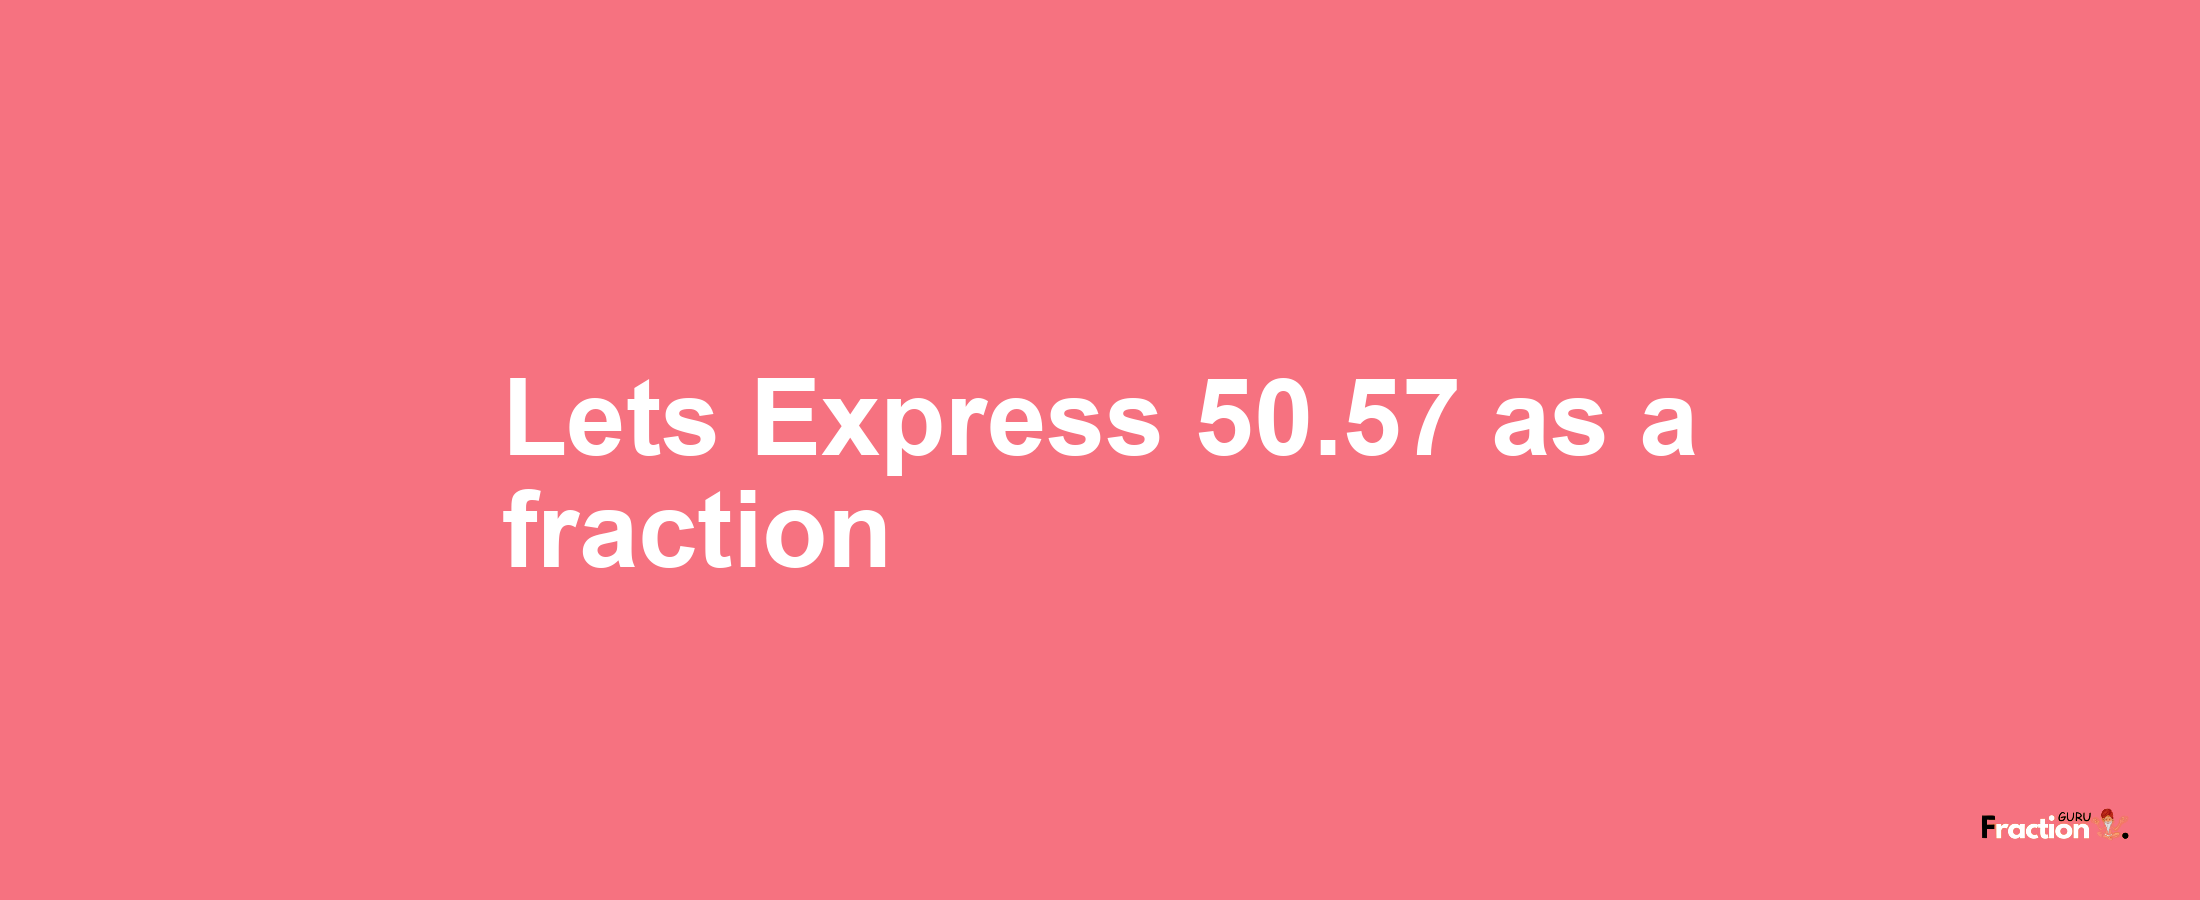 Lets Express 50.57 as afraction